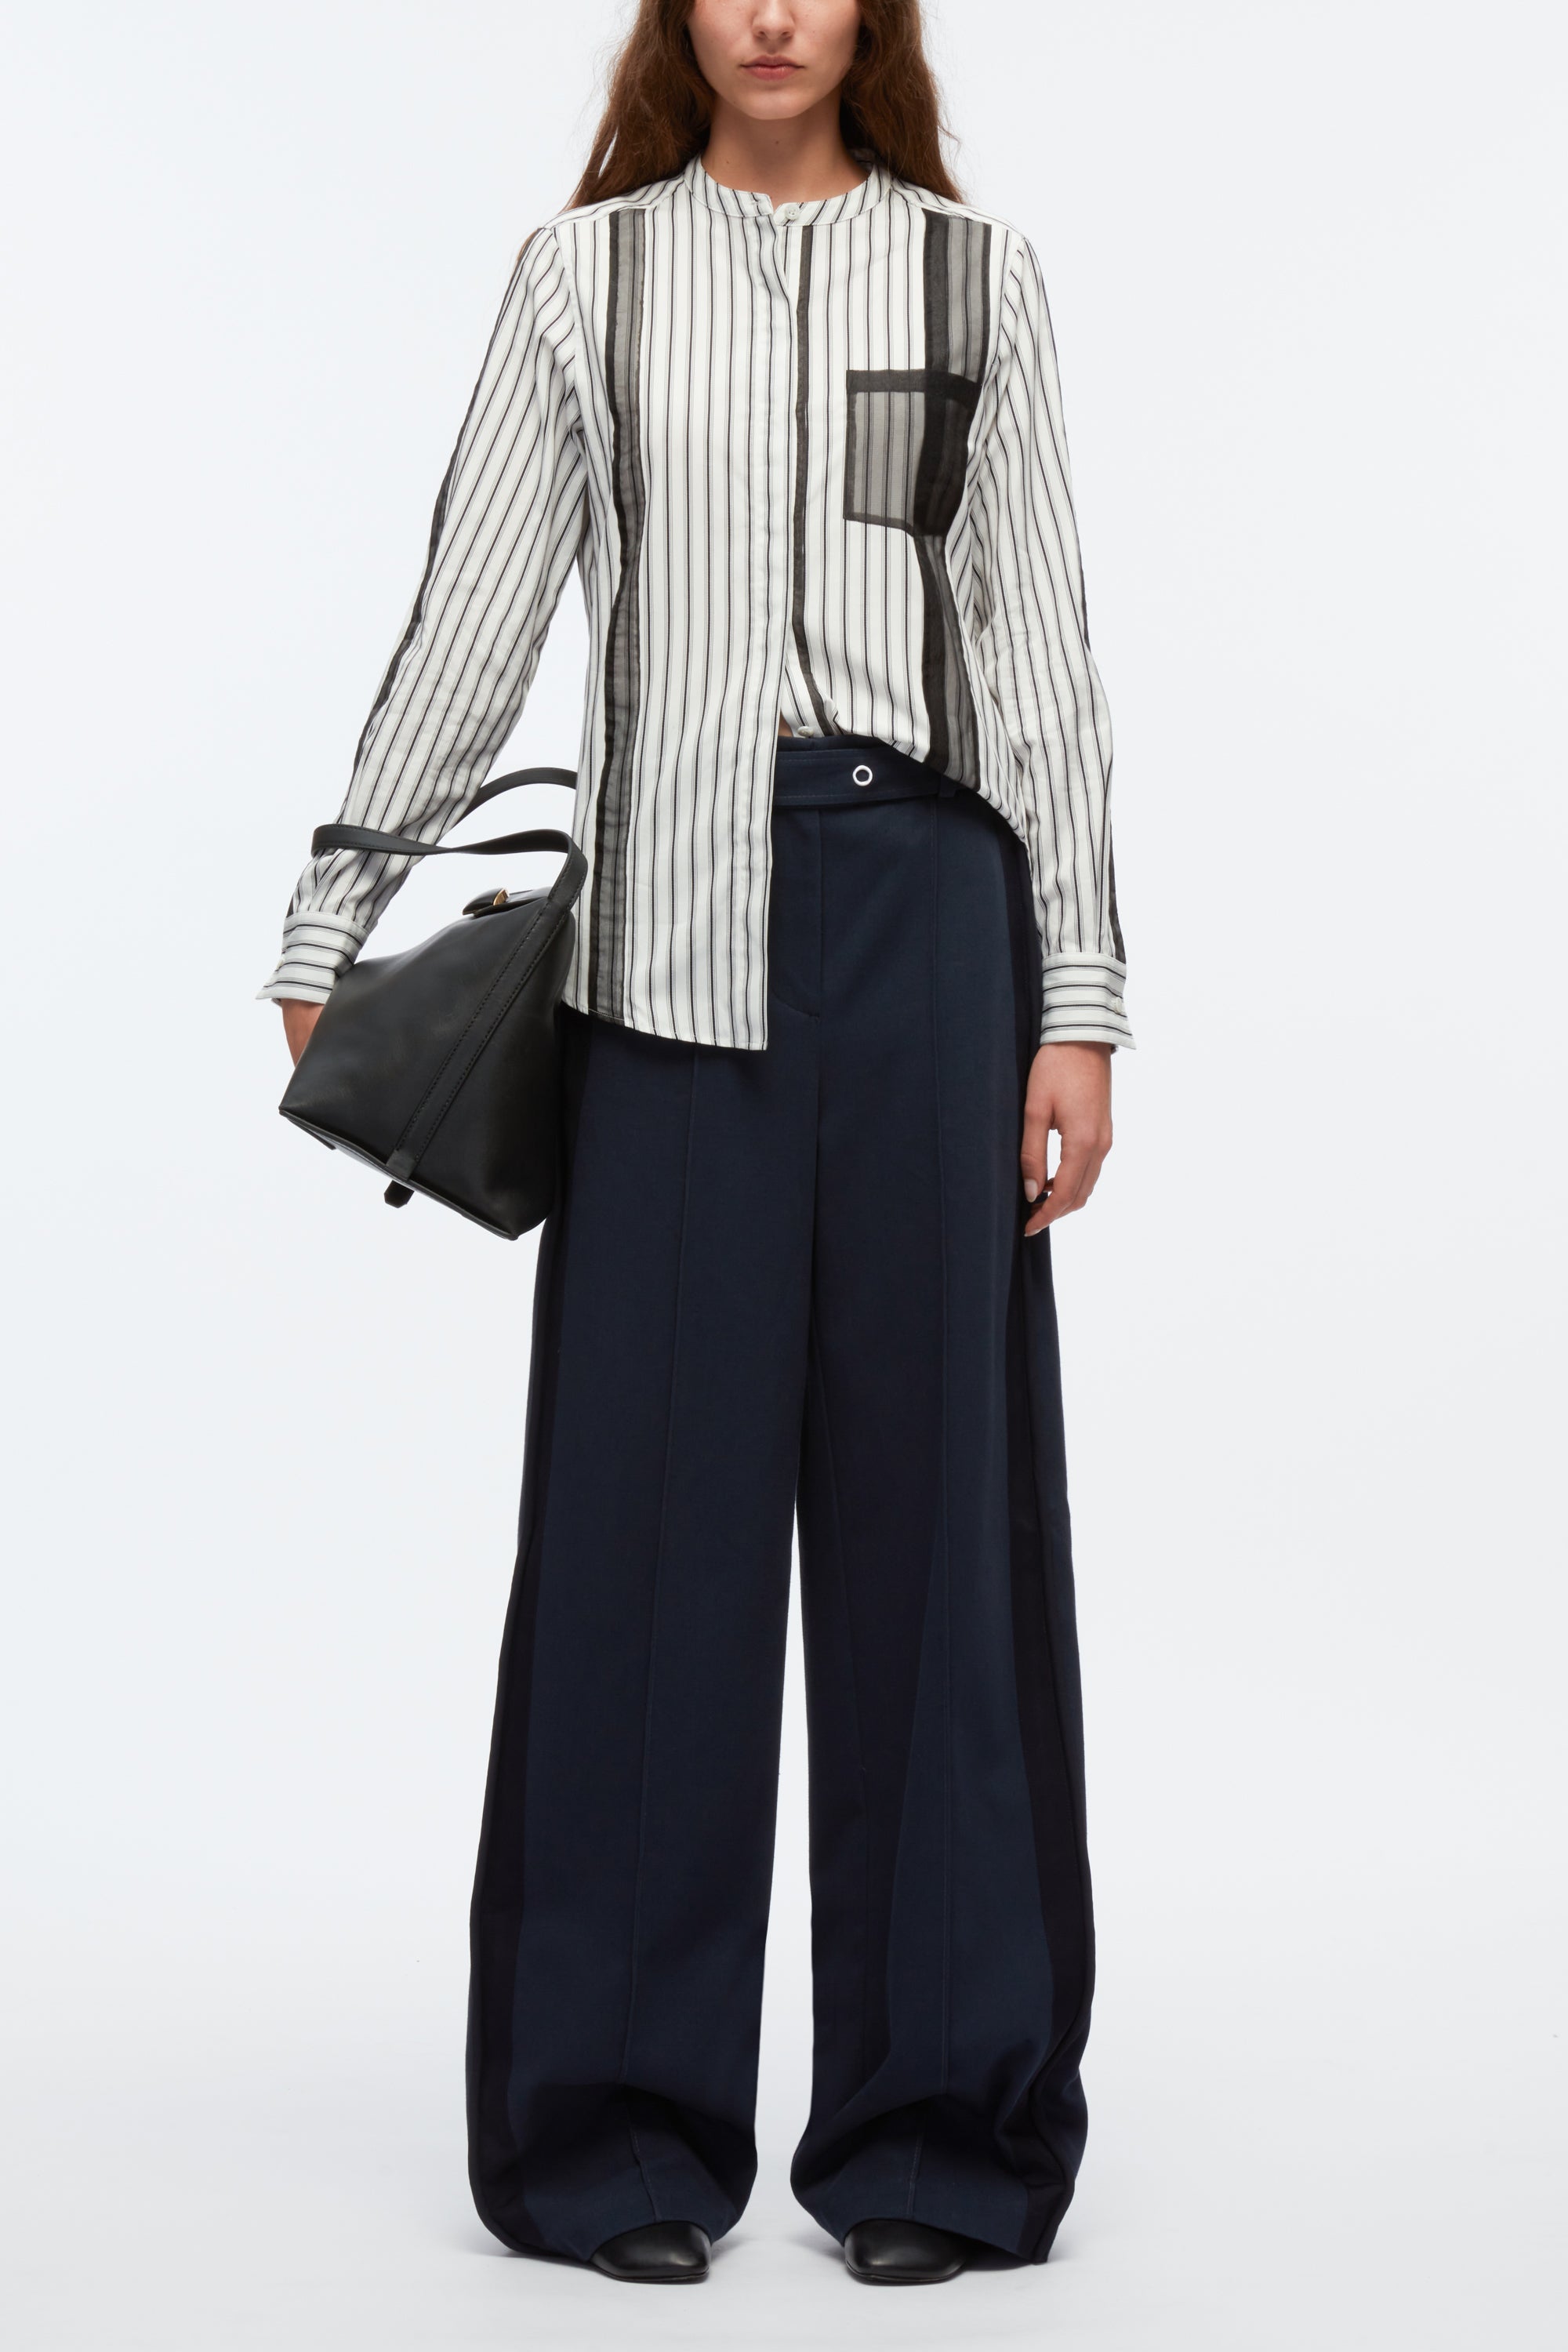 Striped Shirt Dress With Organza Overlay – 3.1 Phillip Lim